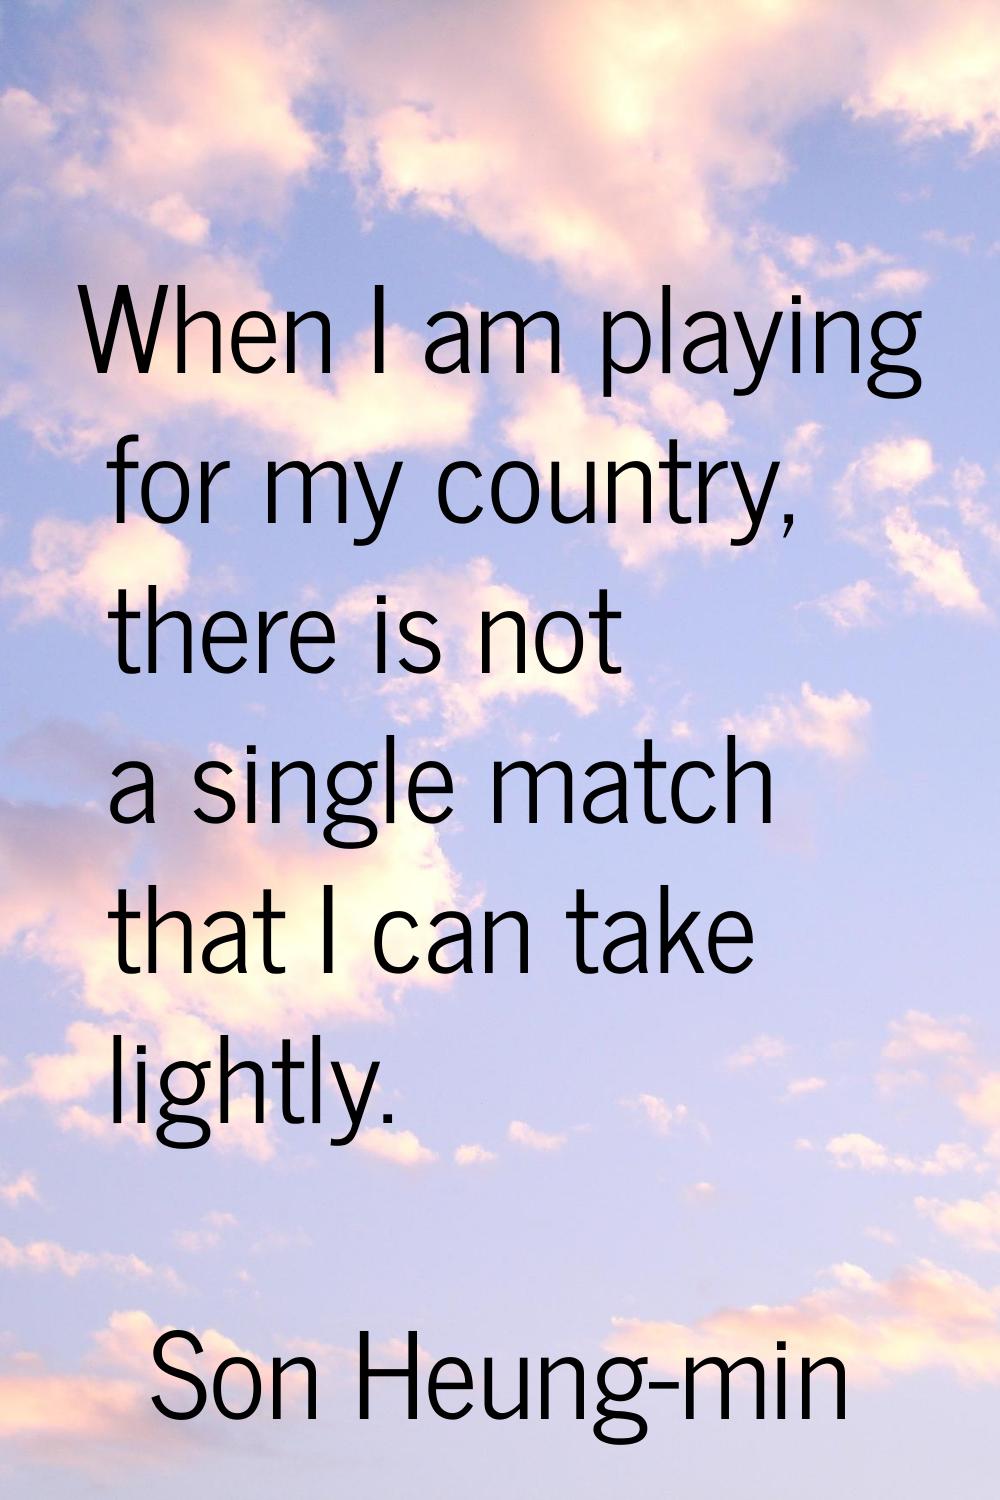 When I am playing for my country, there is not a single match that I can take lightly.